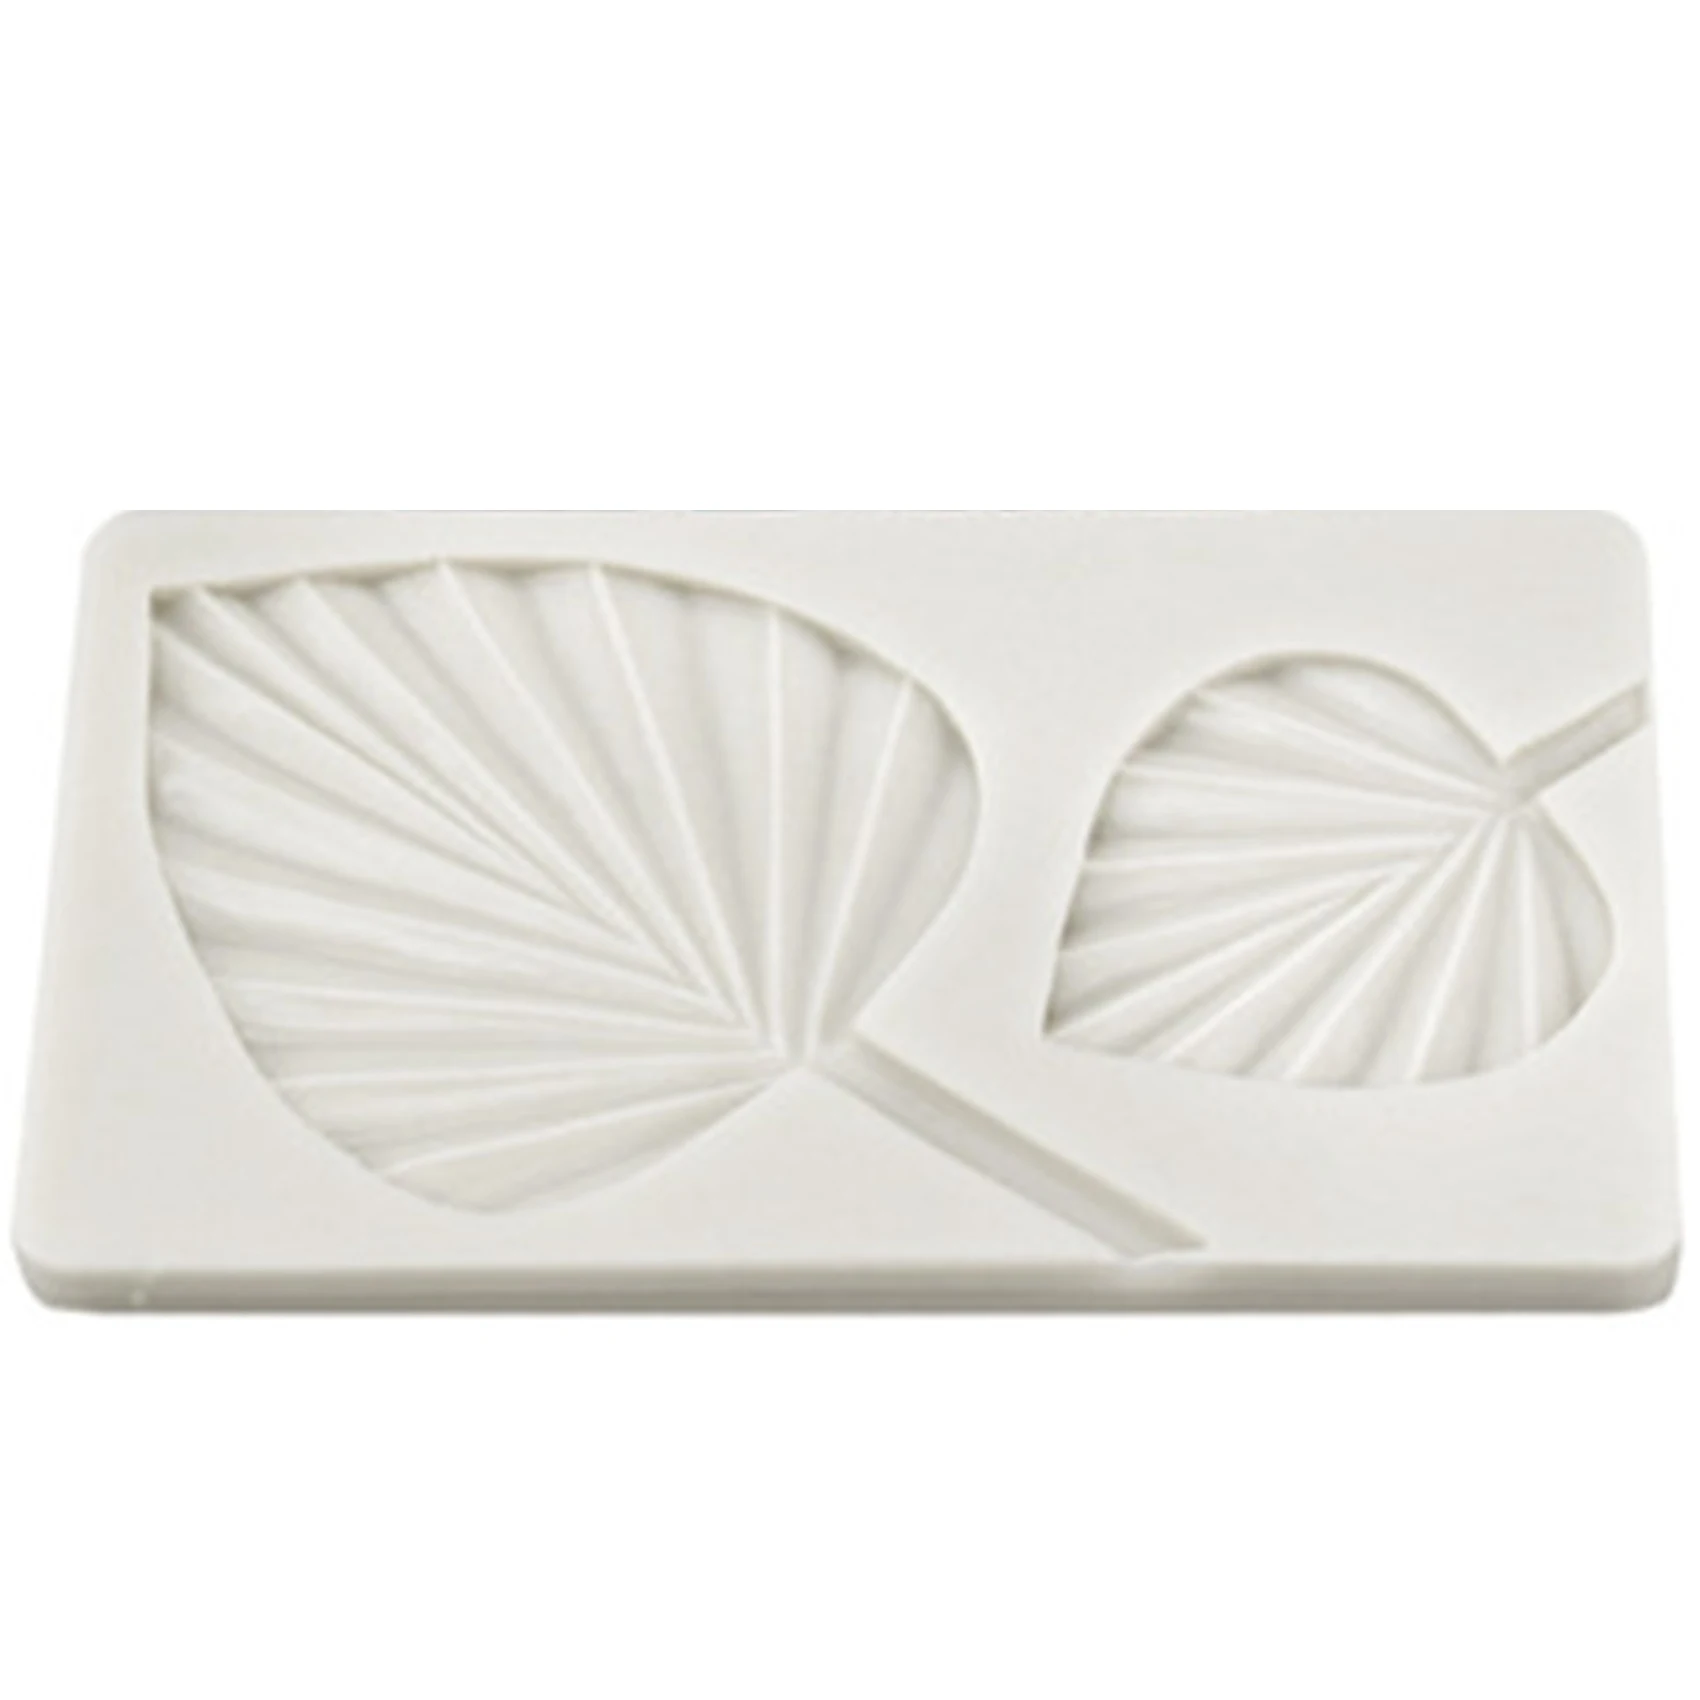 

Palm Spear Leaf Silicone Mold DIY Chocolate Fondant Sugarcraft Cake Mould Handmade Clay Moulds Cake Decorating Tools